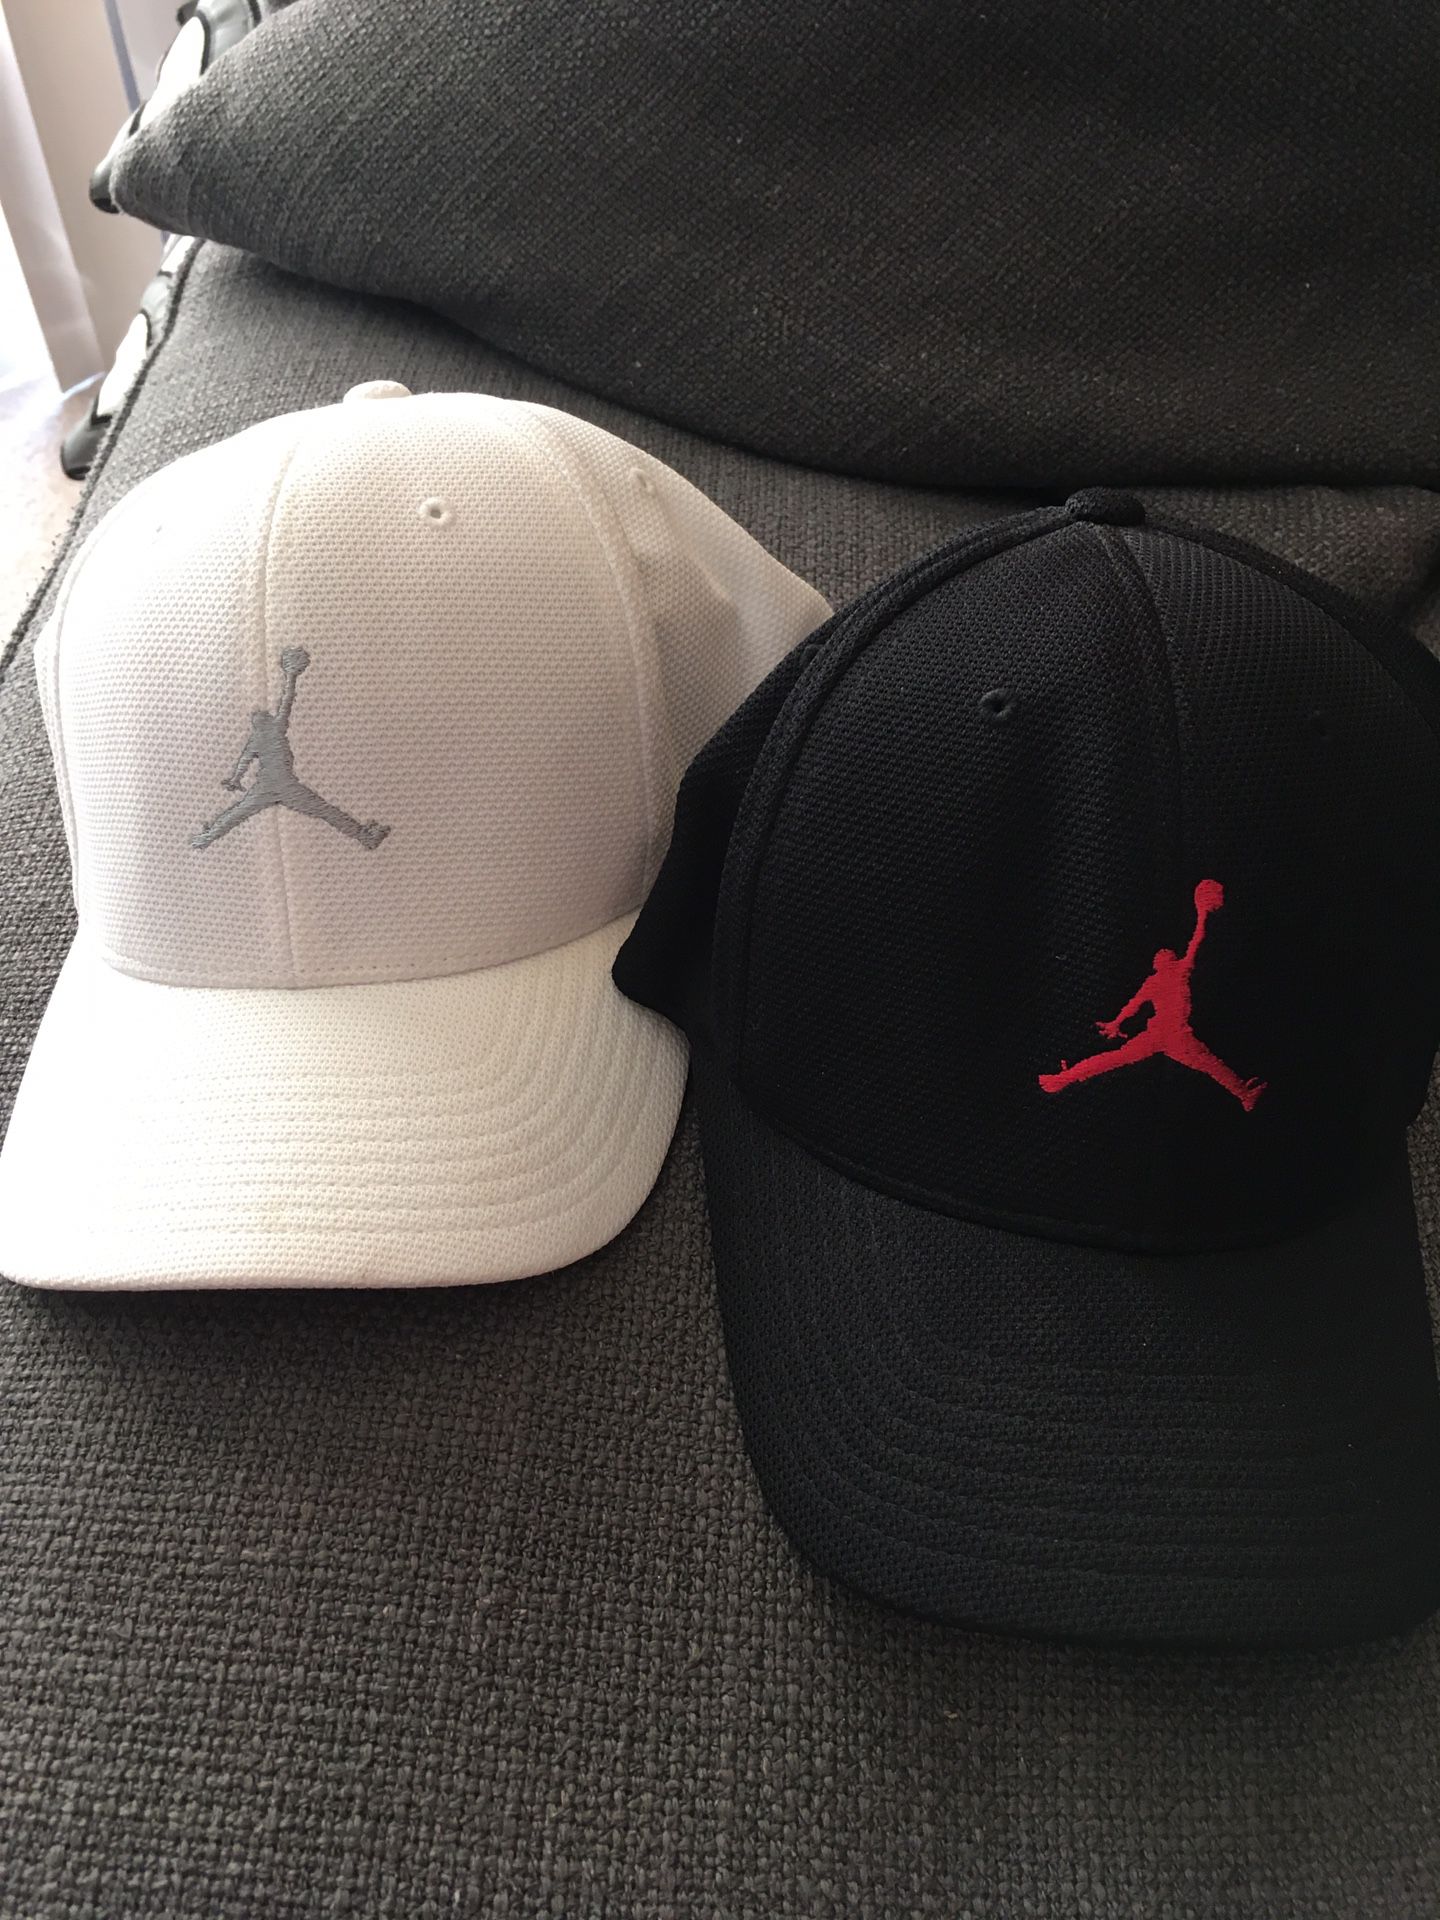 NEW Michael Jordan Hats baseball caps . Price is for both. Size S/M Adult